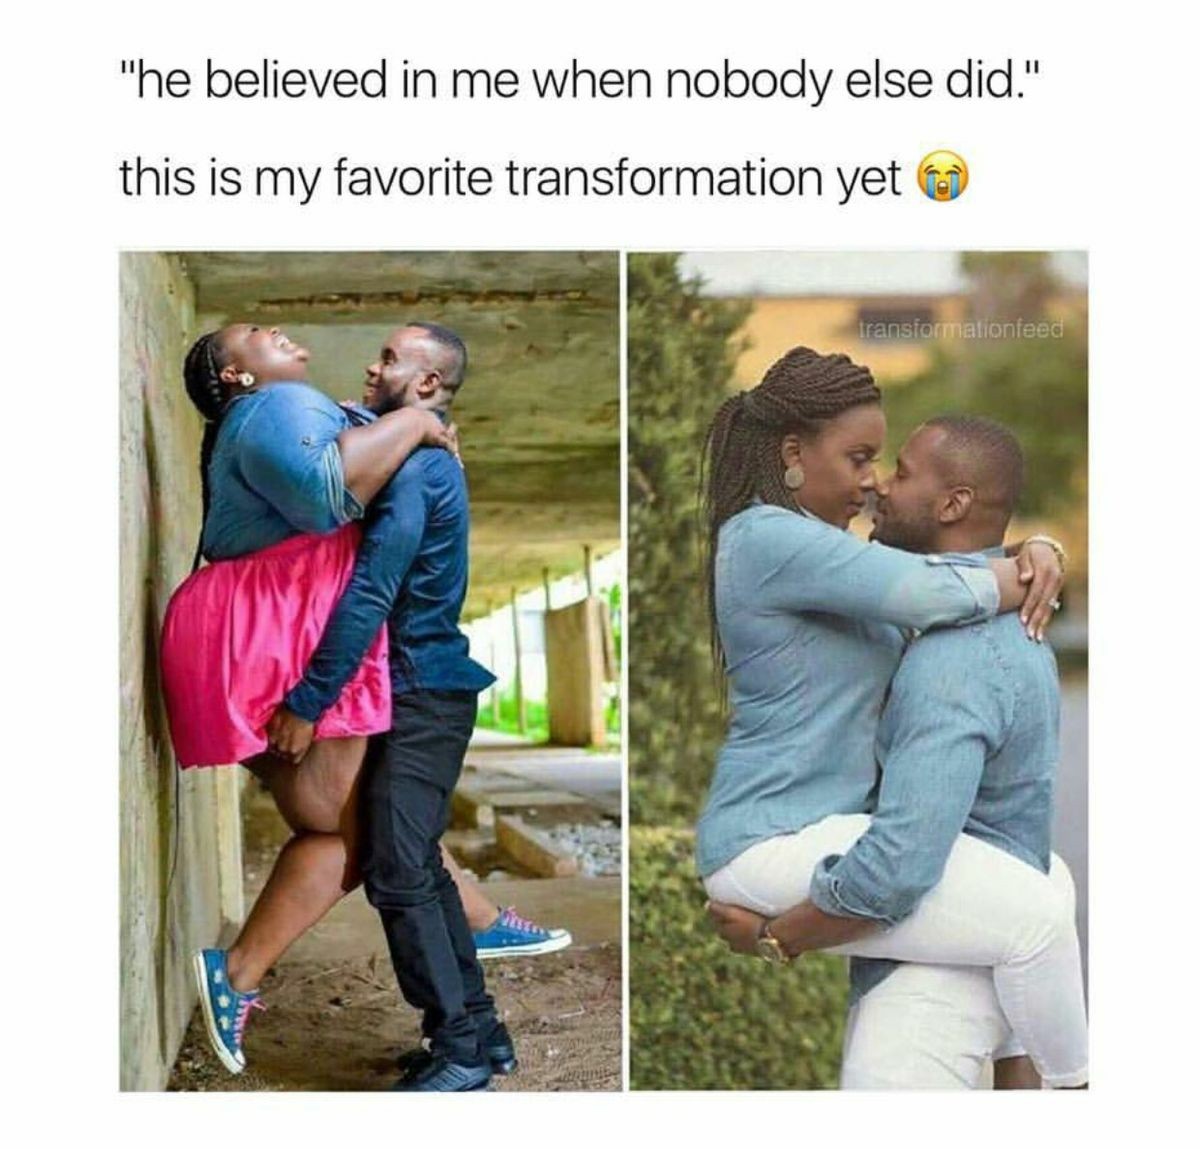 nobody believed in me i did - "he believed in me when nobody else did." this is my favorite transformation yet transformationfeed